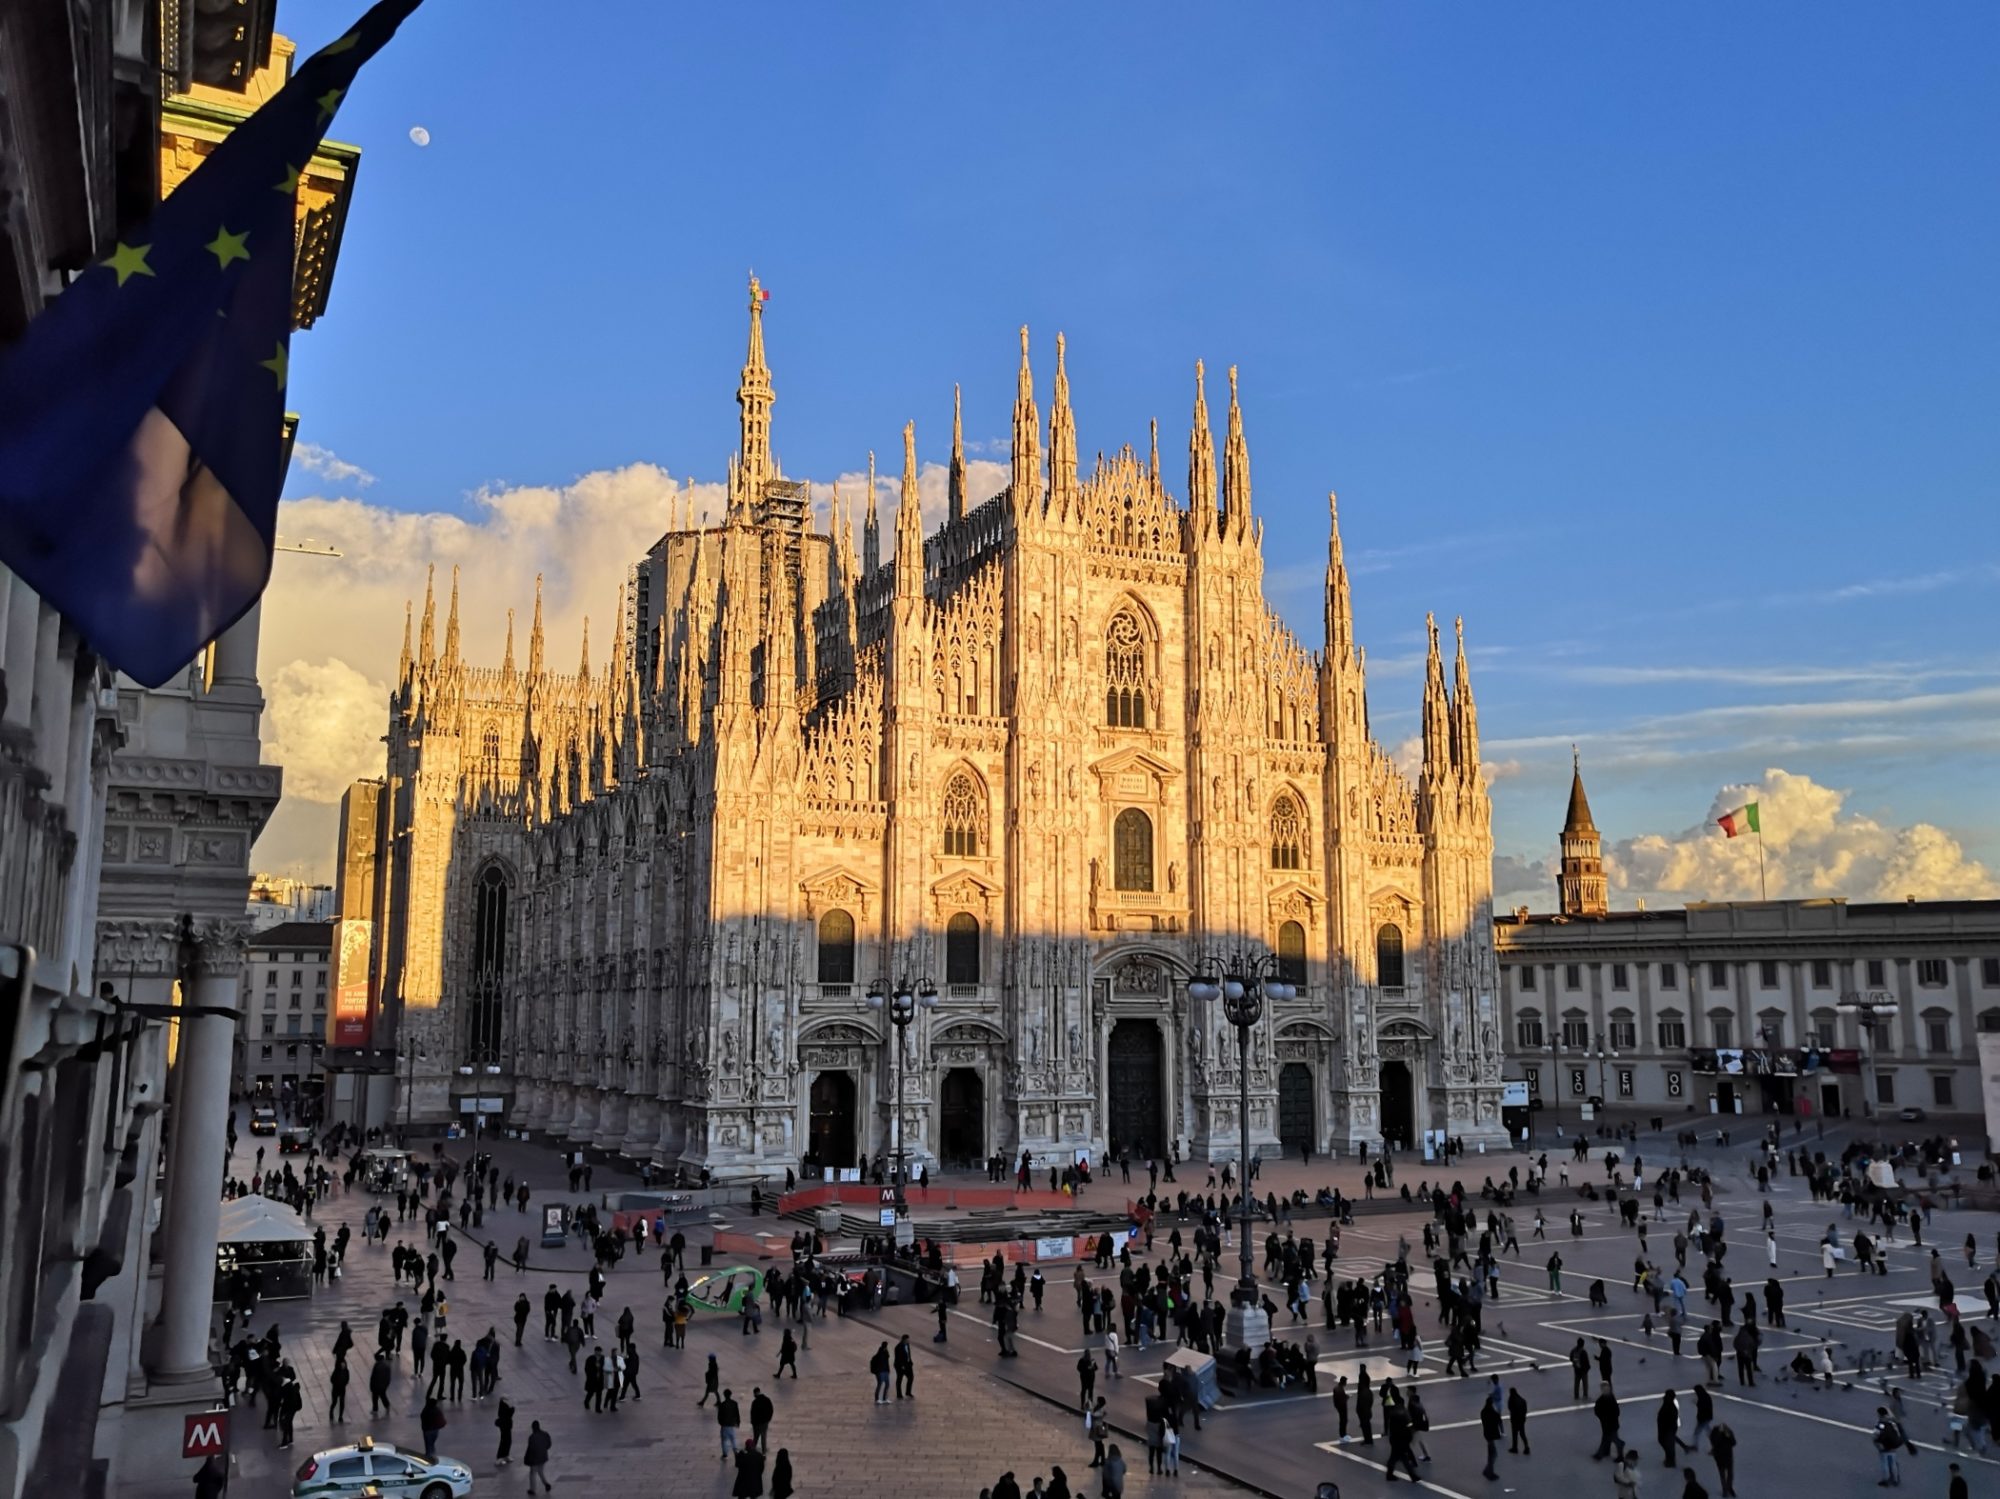 Milan - city of 1.3 million people with a strong food culture